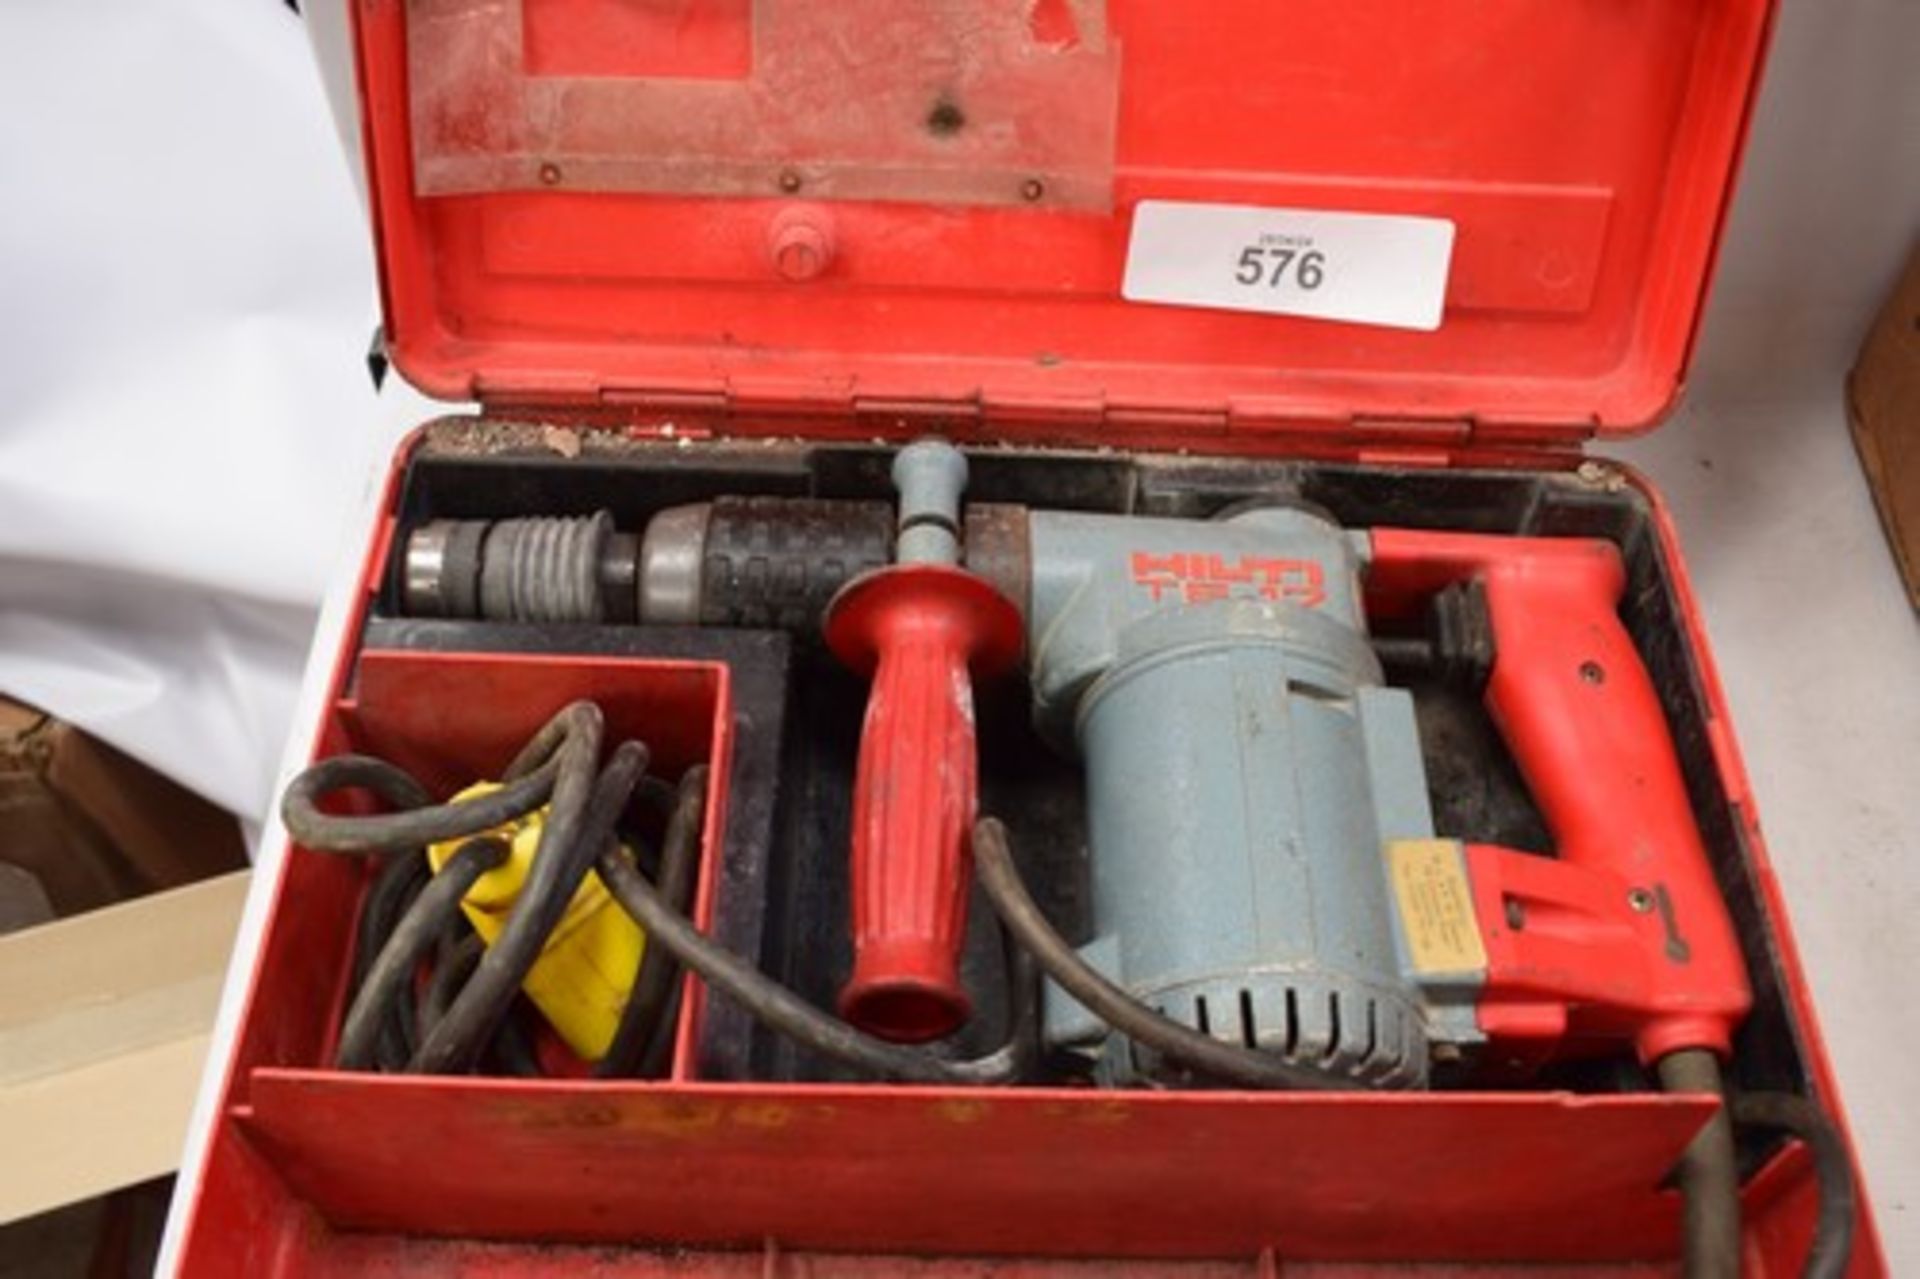 1 x Hilti TE 17 electric drill 110v-450w with original carry case - second-hand (SW)